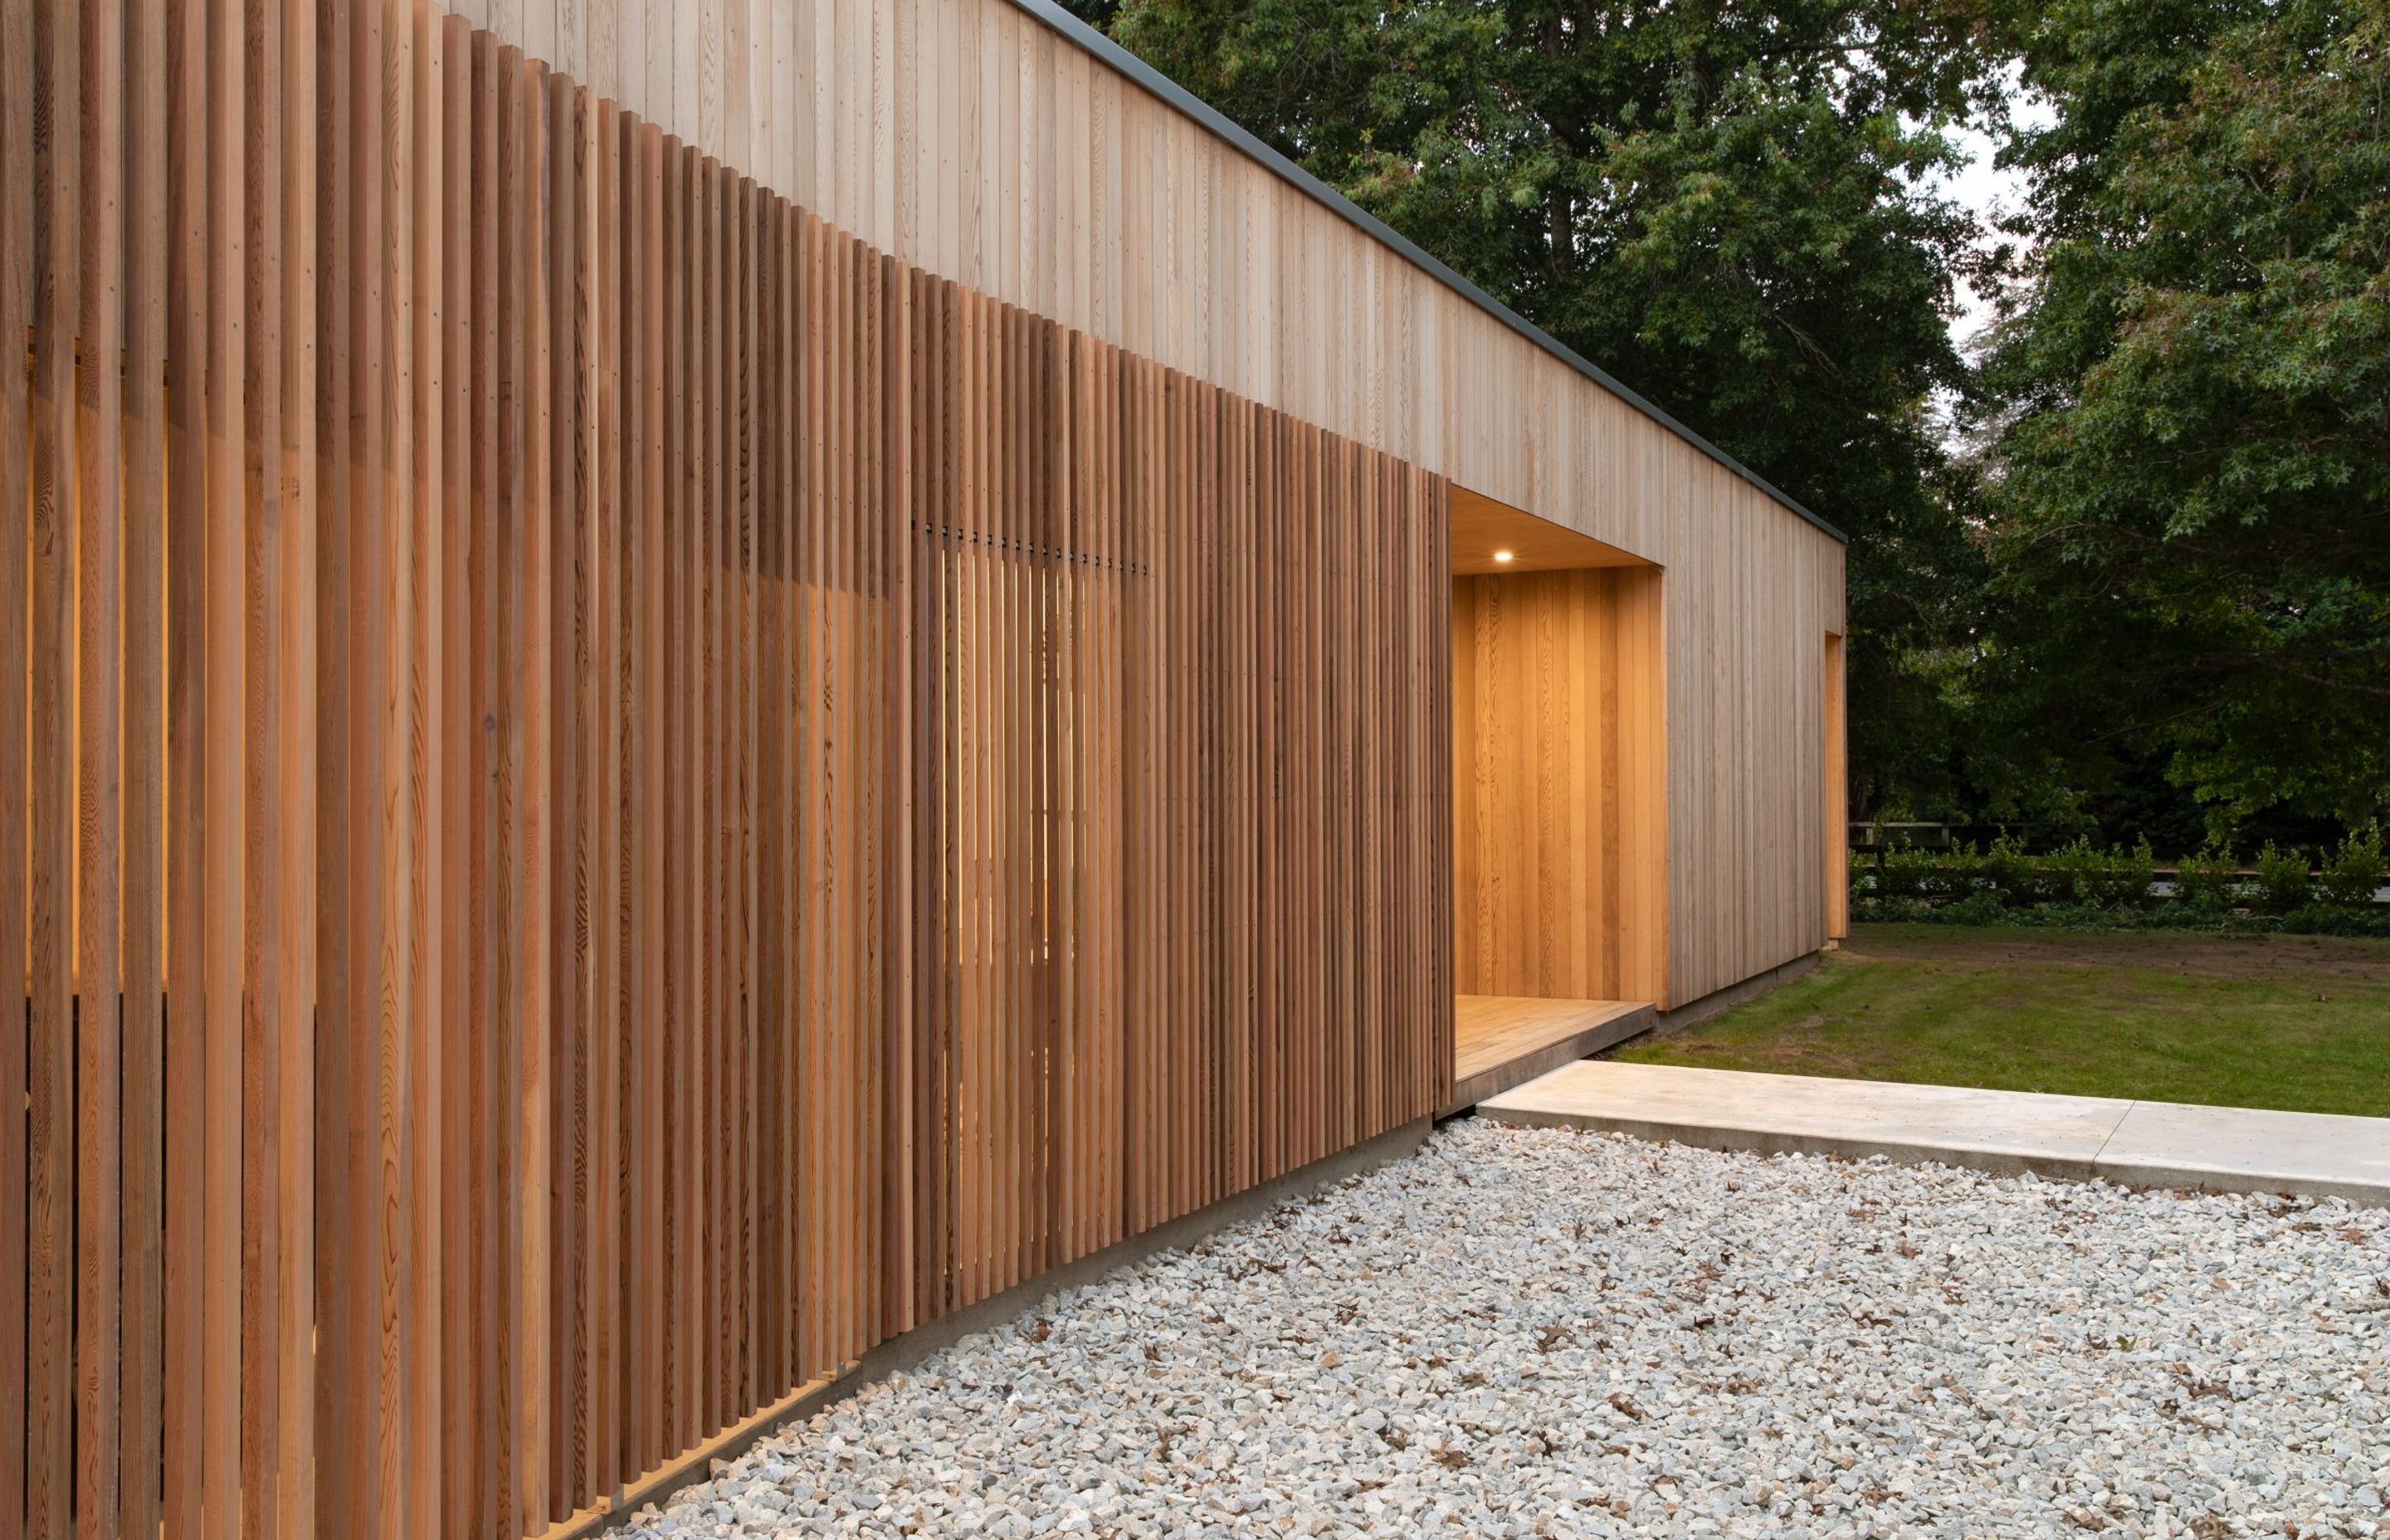 The main entrance is inset into the cedar-clad pavilion. A dramatic cedar rainscreen shields the carport from the road and filters light through the large office window.